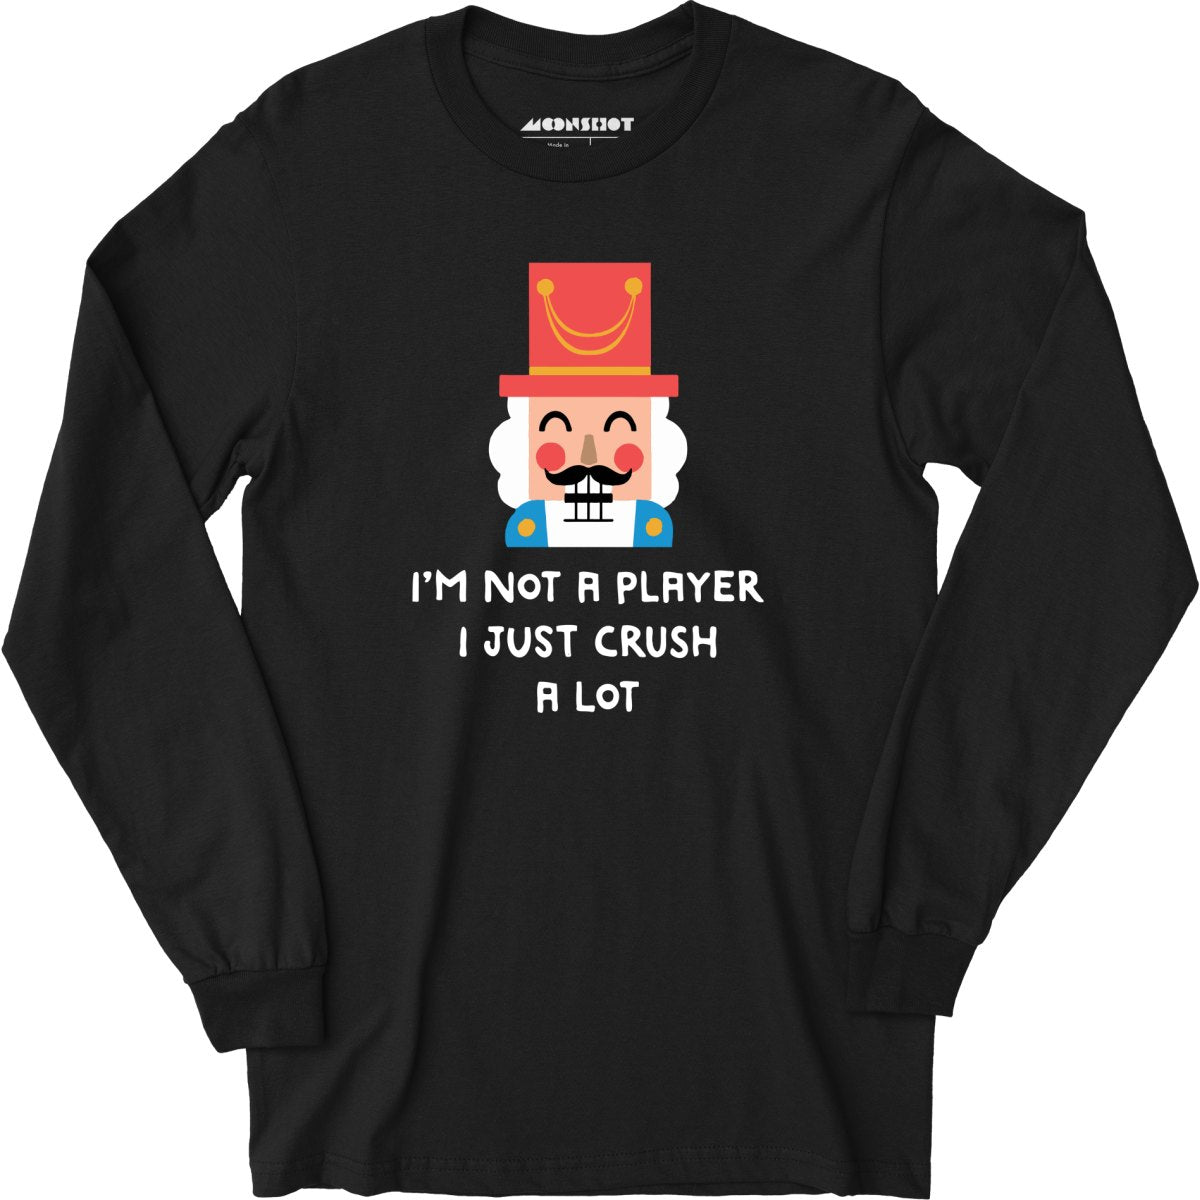 I'm Not a Player I Just Crush A Lot - Long Sleeve T-Shirt